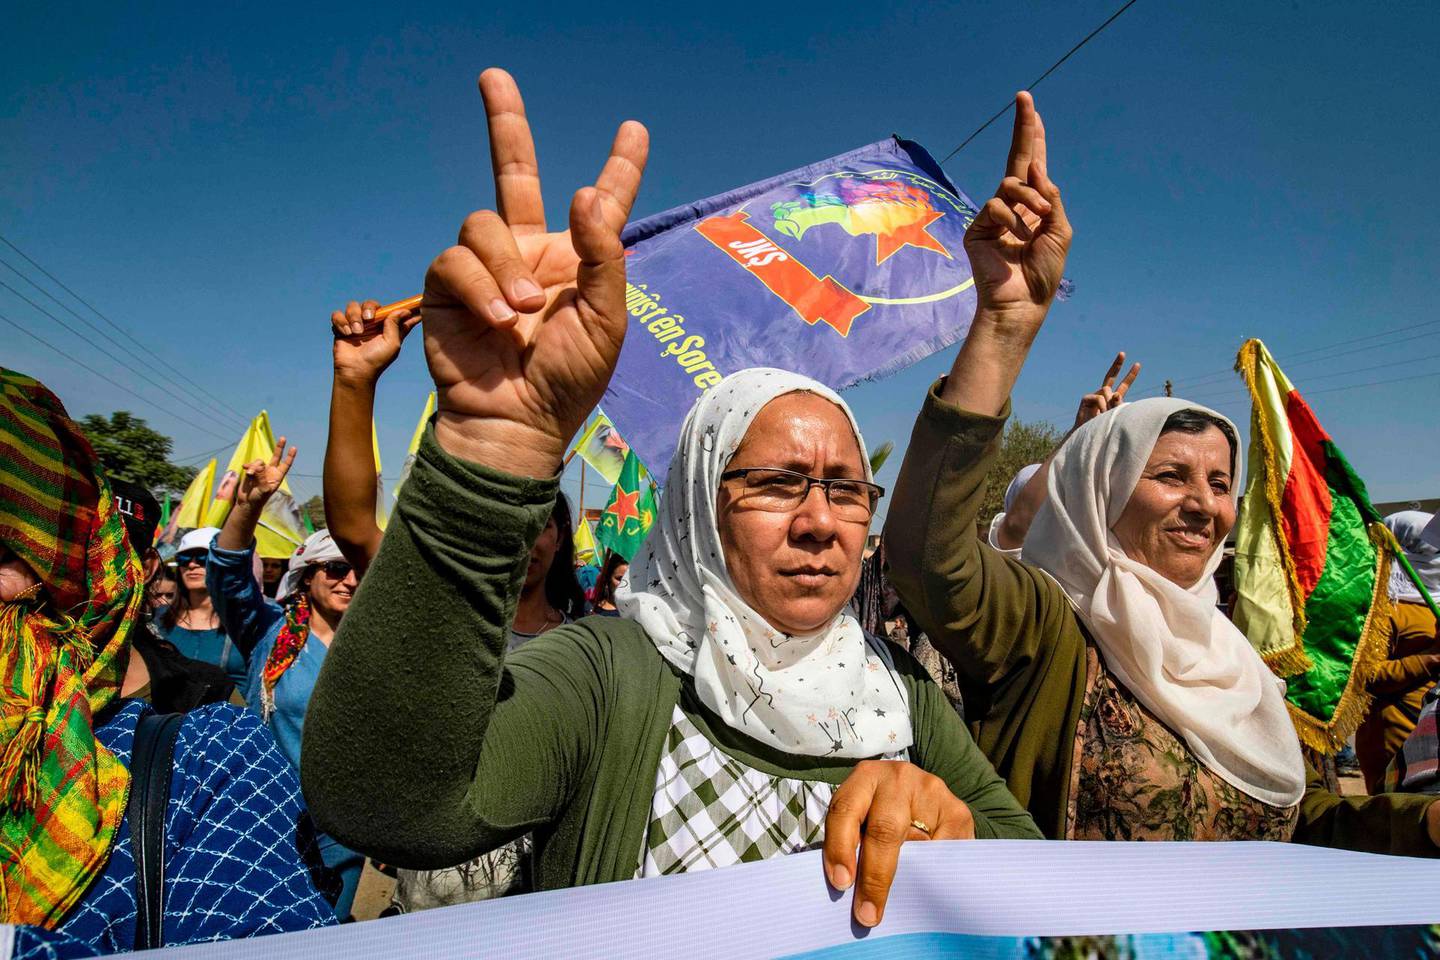 Syrian Kurds flashe the v-sign during a demonstration against Turkish threats in Ras al-Ain town in Syria's Hasakeh province near the Turkish border on October 9, 2019. Syrian Kurds called on Damascus ally Moscow to facilitate "dialogue" with the regime, following threats of a Turkish invasion of northeastern Syria. / AFP / Delil SOULEIMAN
